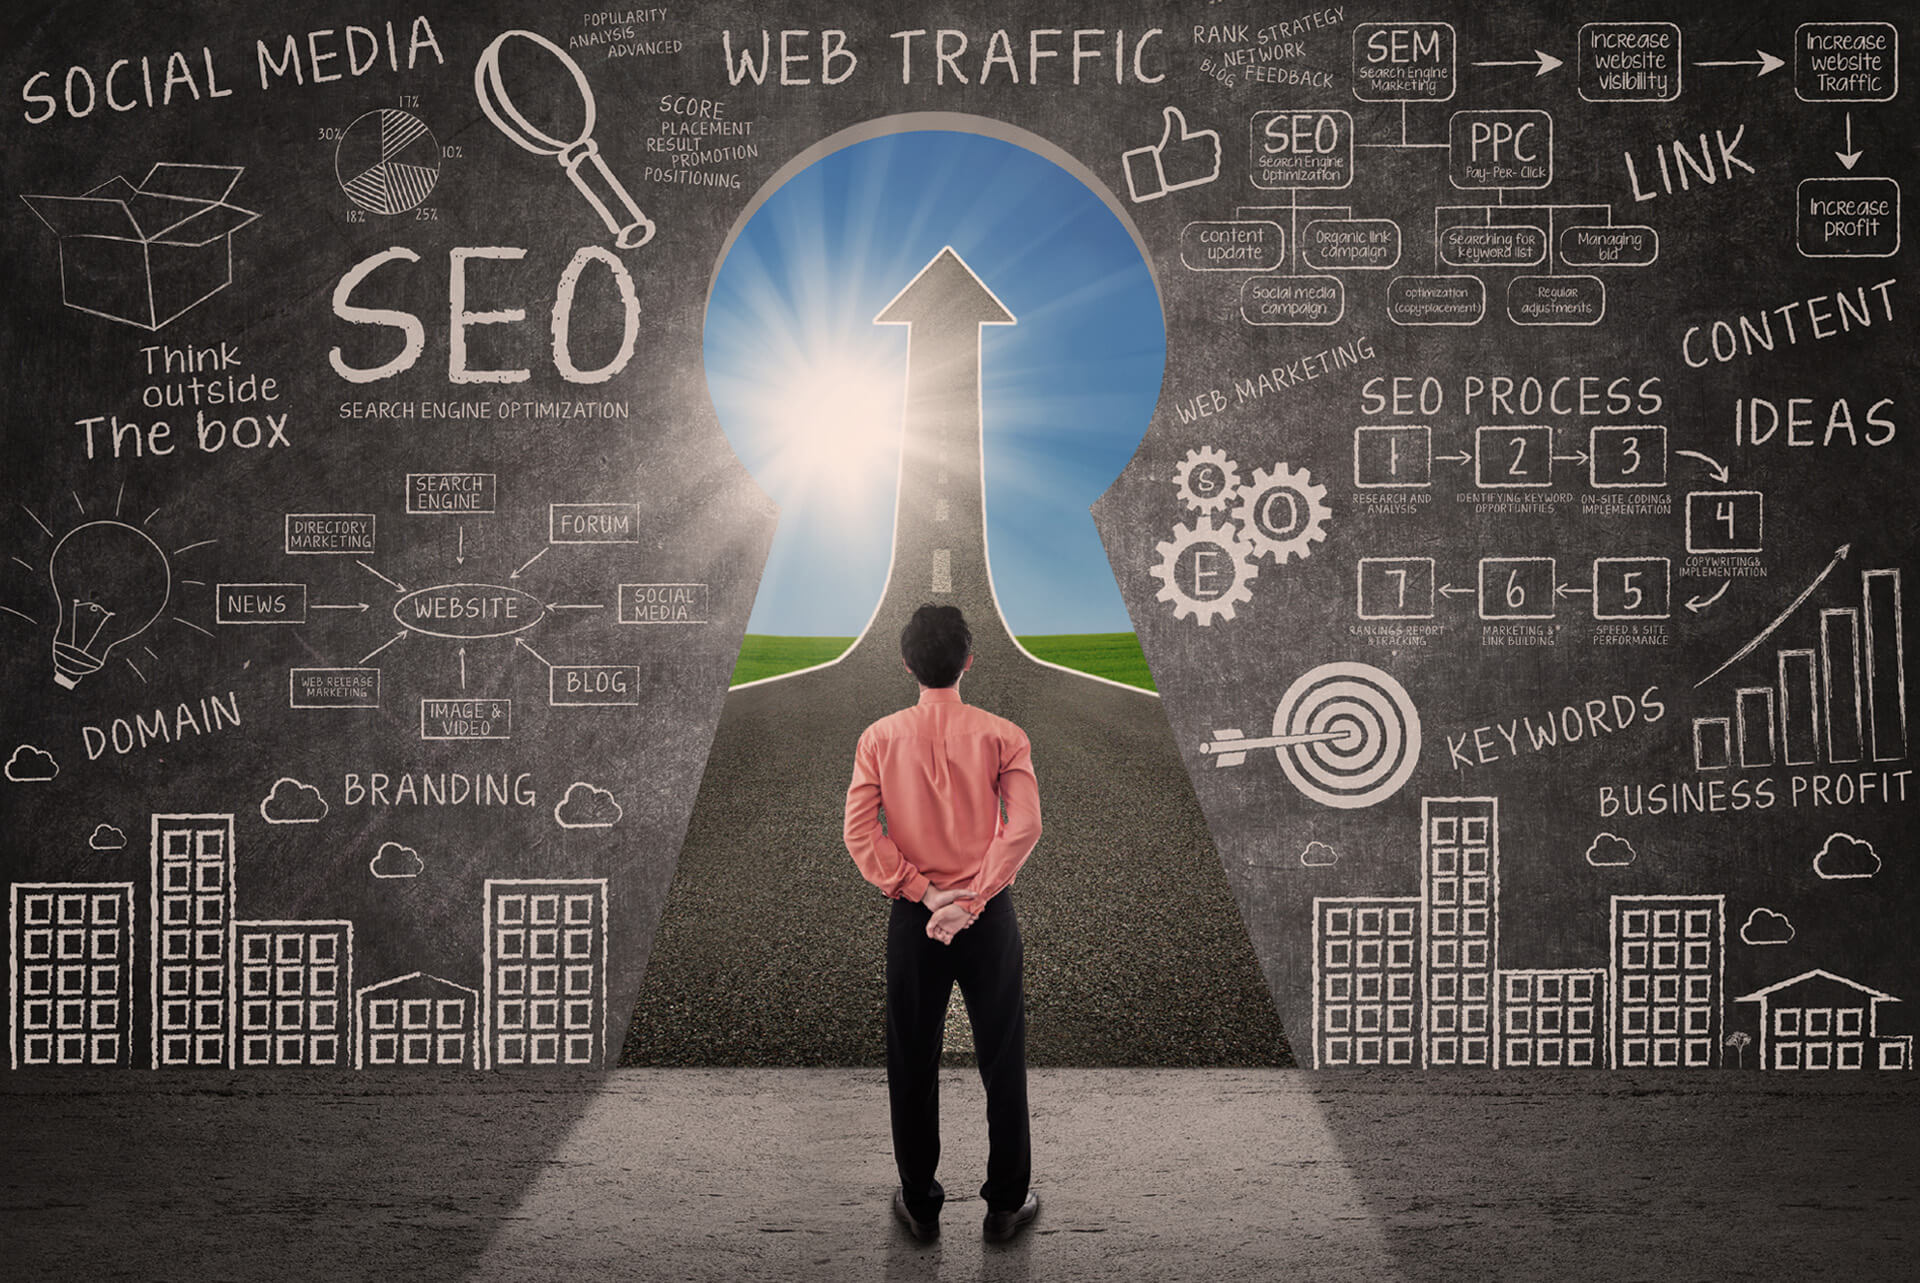 Why SEO is important for business